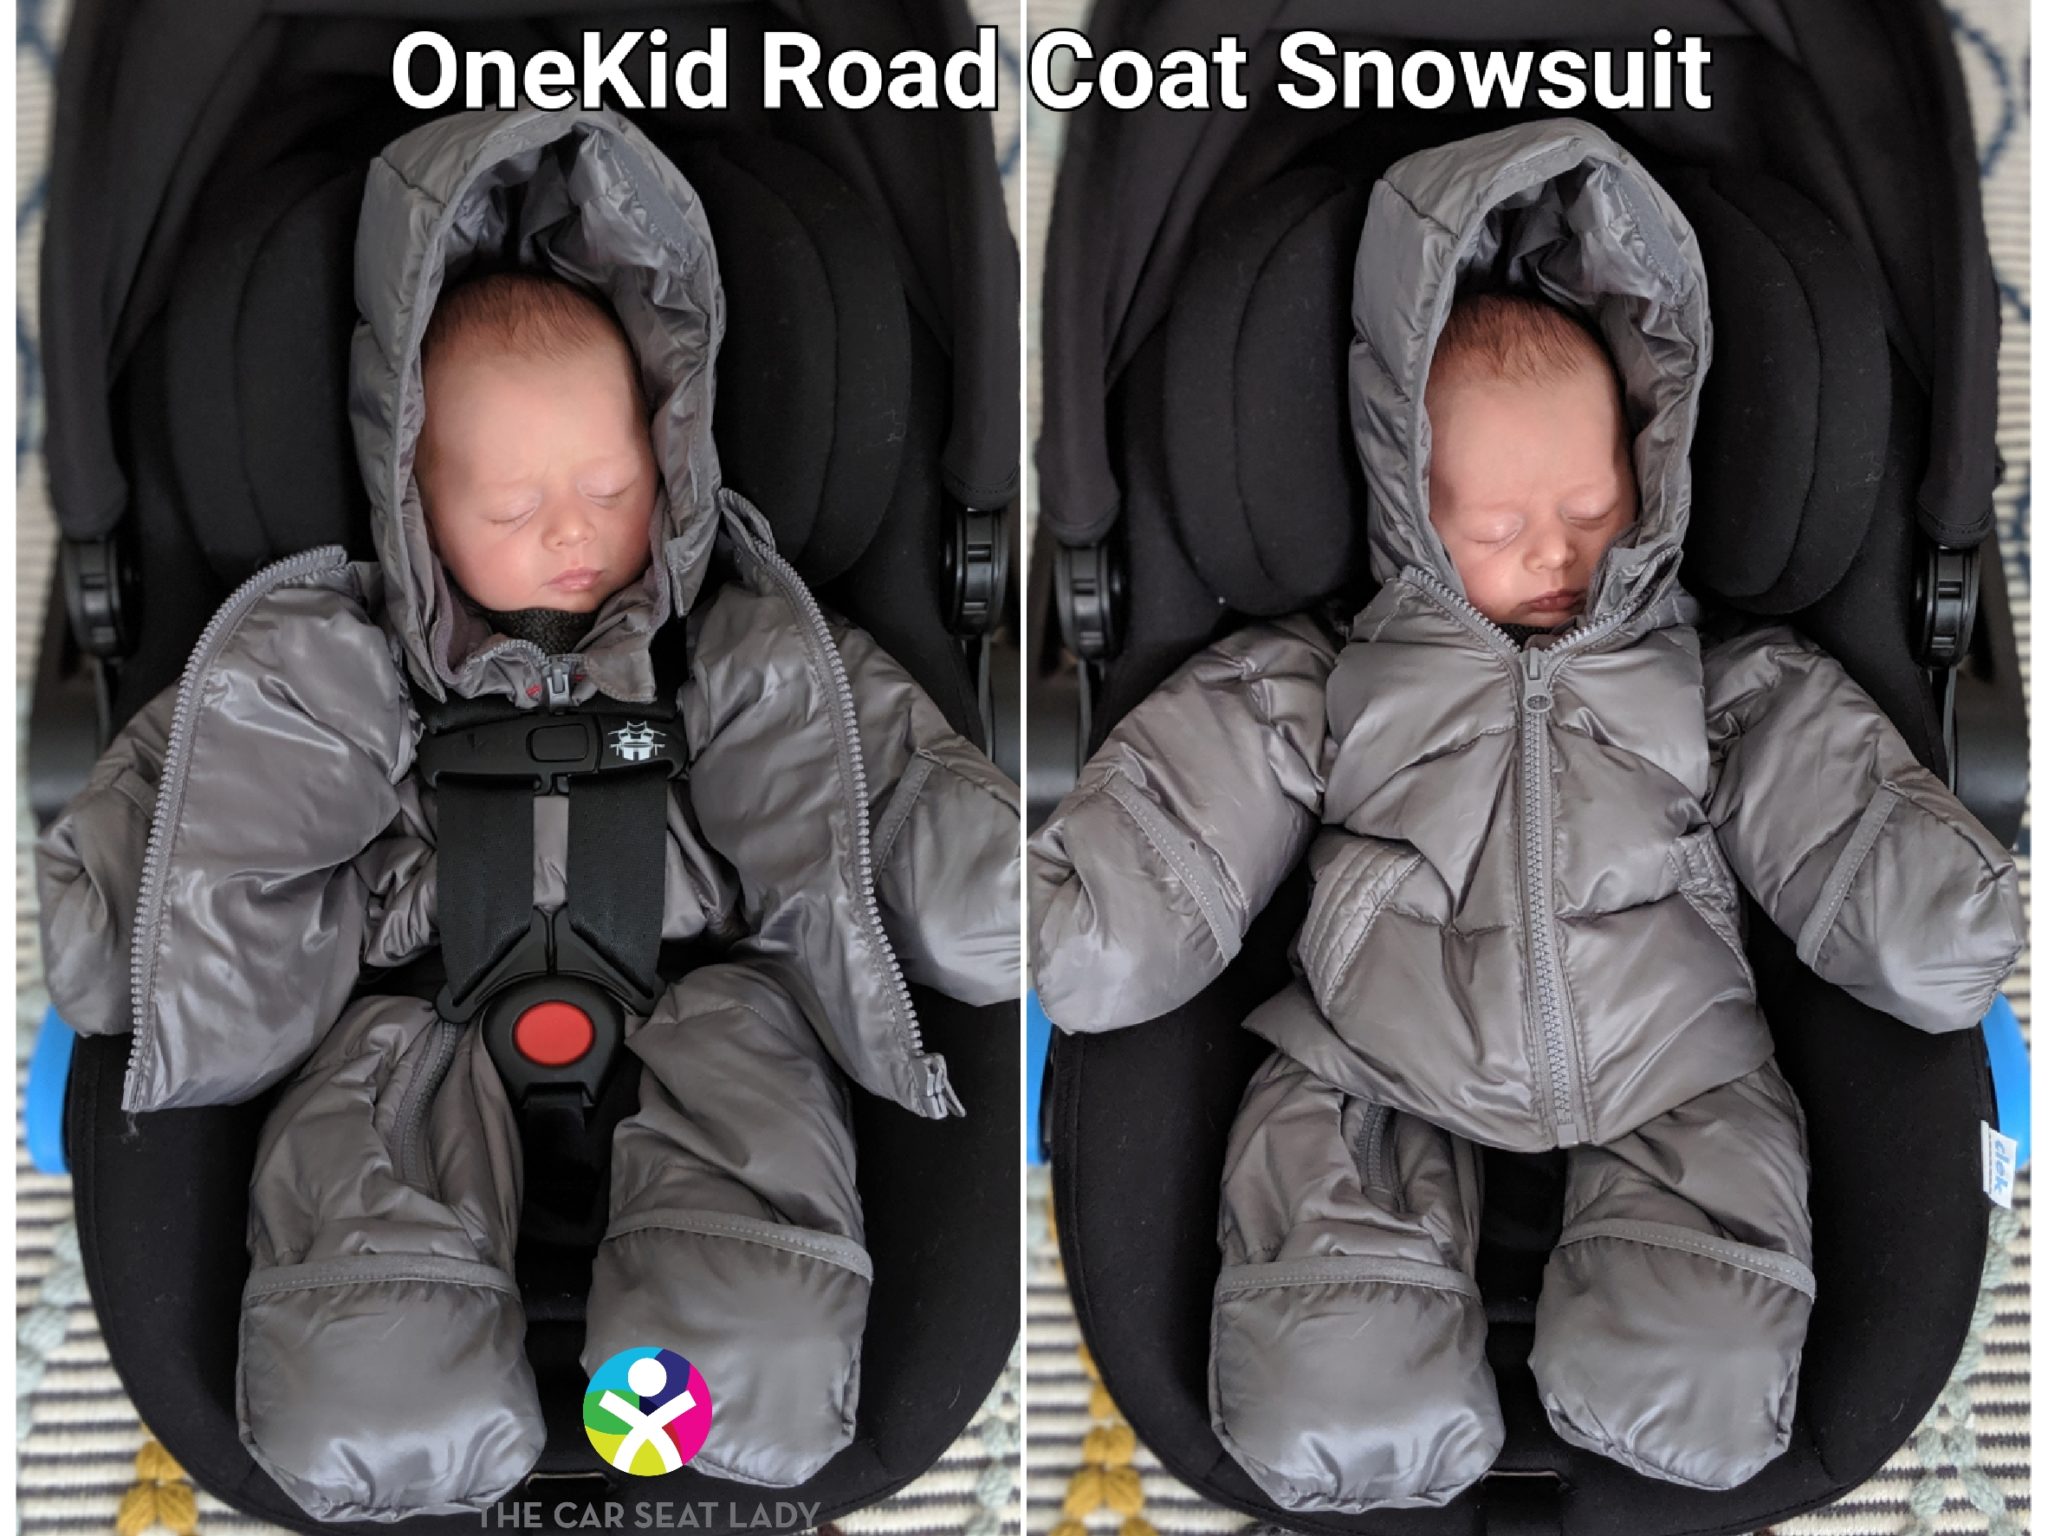 The Car Seat Ladycold Weather Tips, How To Keep Baby Warm In Car Seat Winter